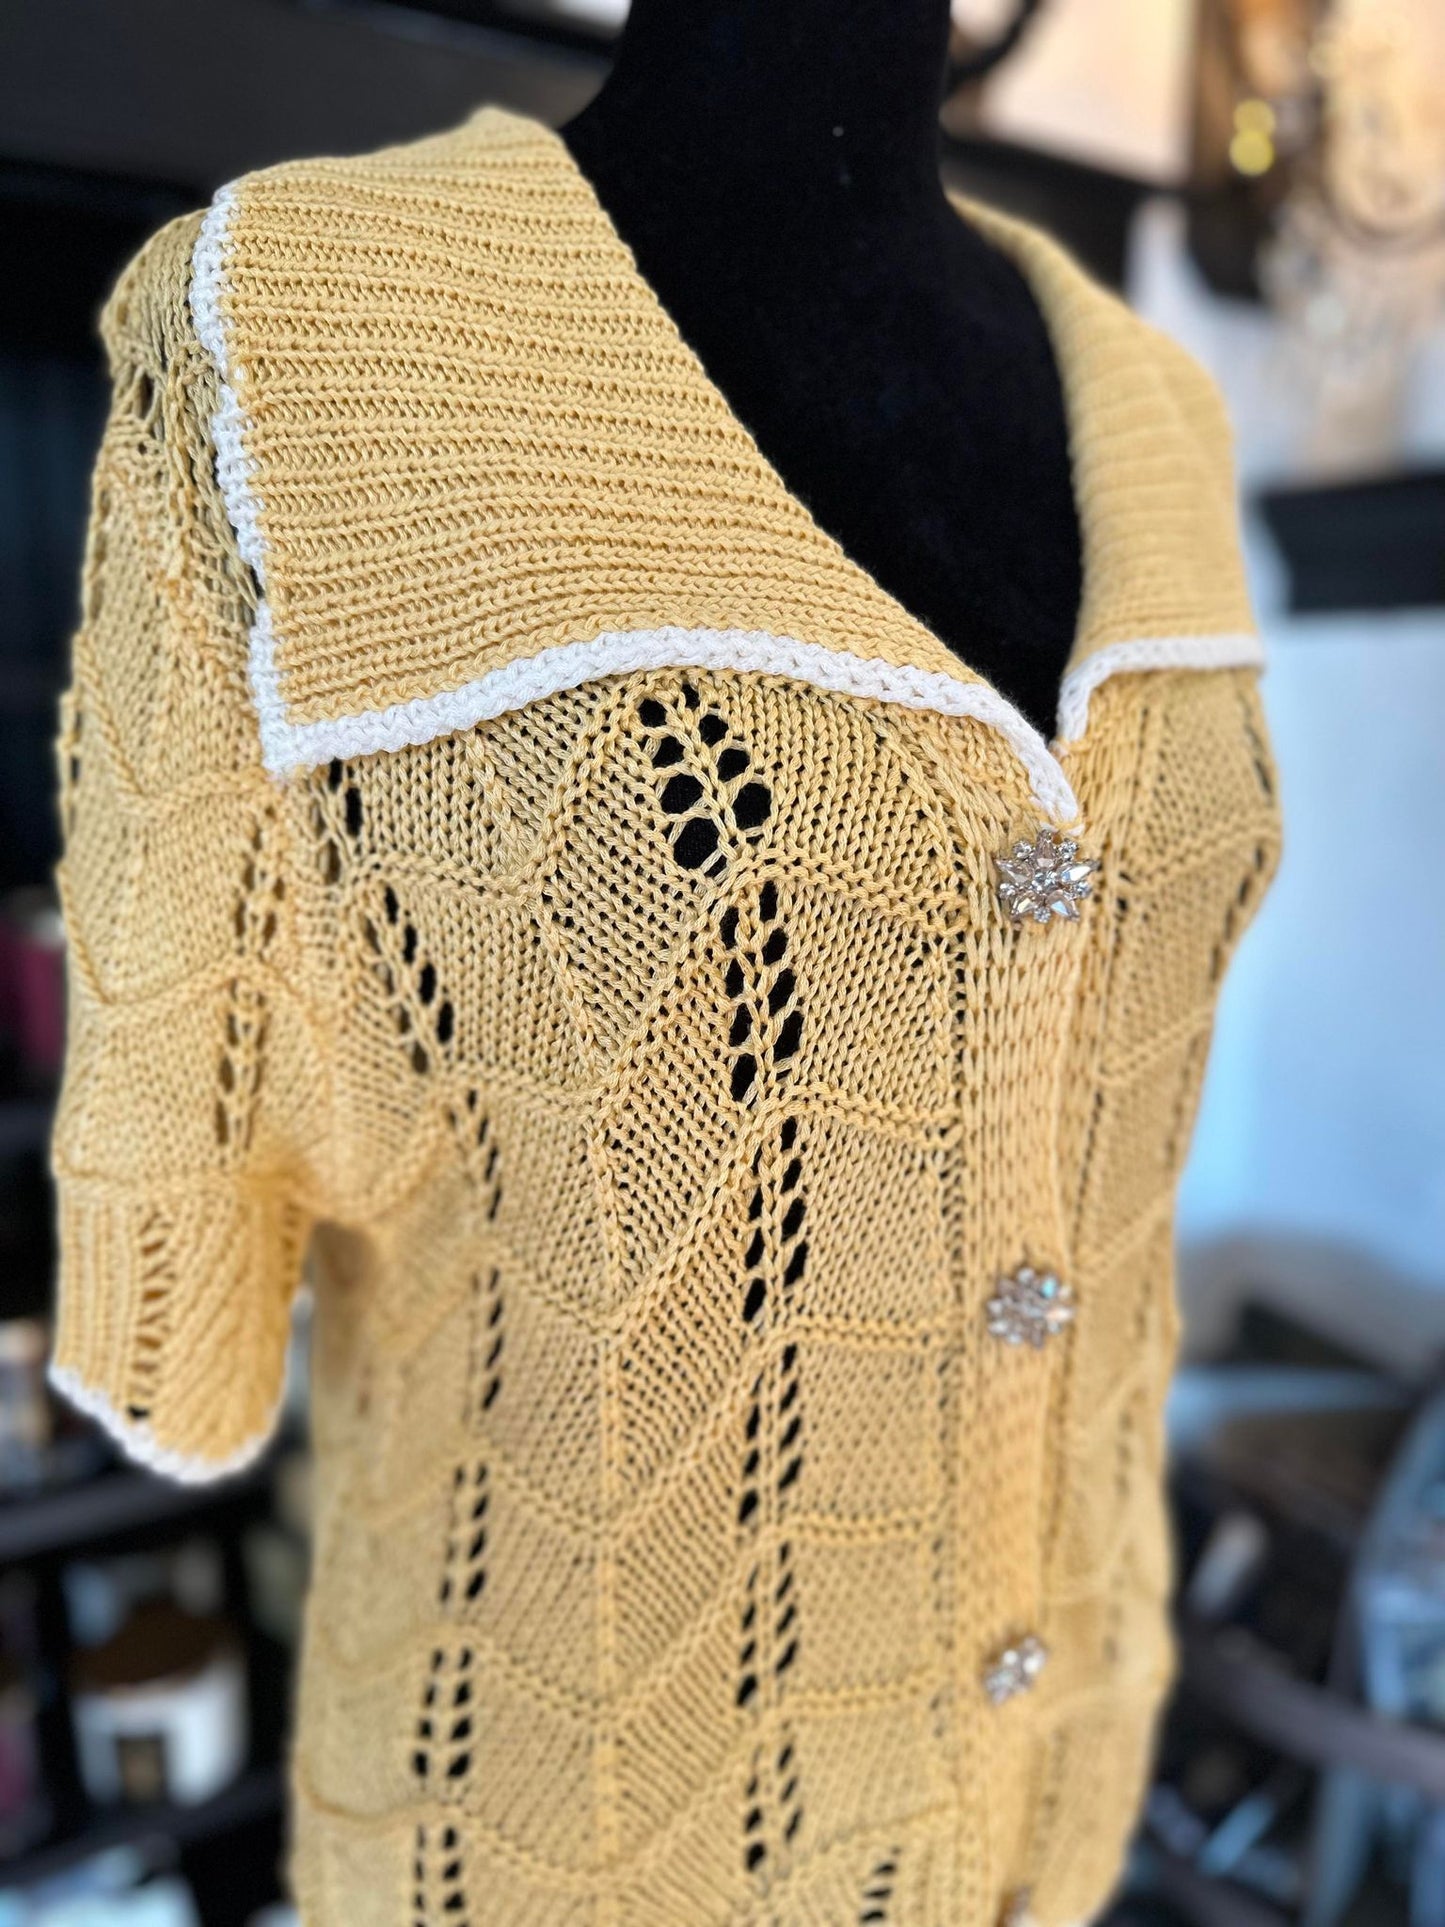 Knitted Yellow Sweater With Rhinestone Buttons